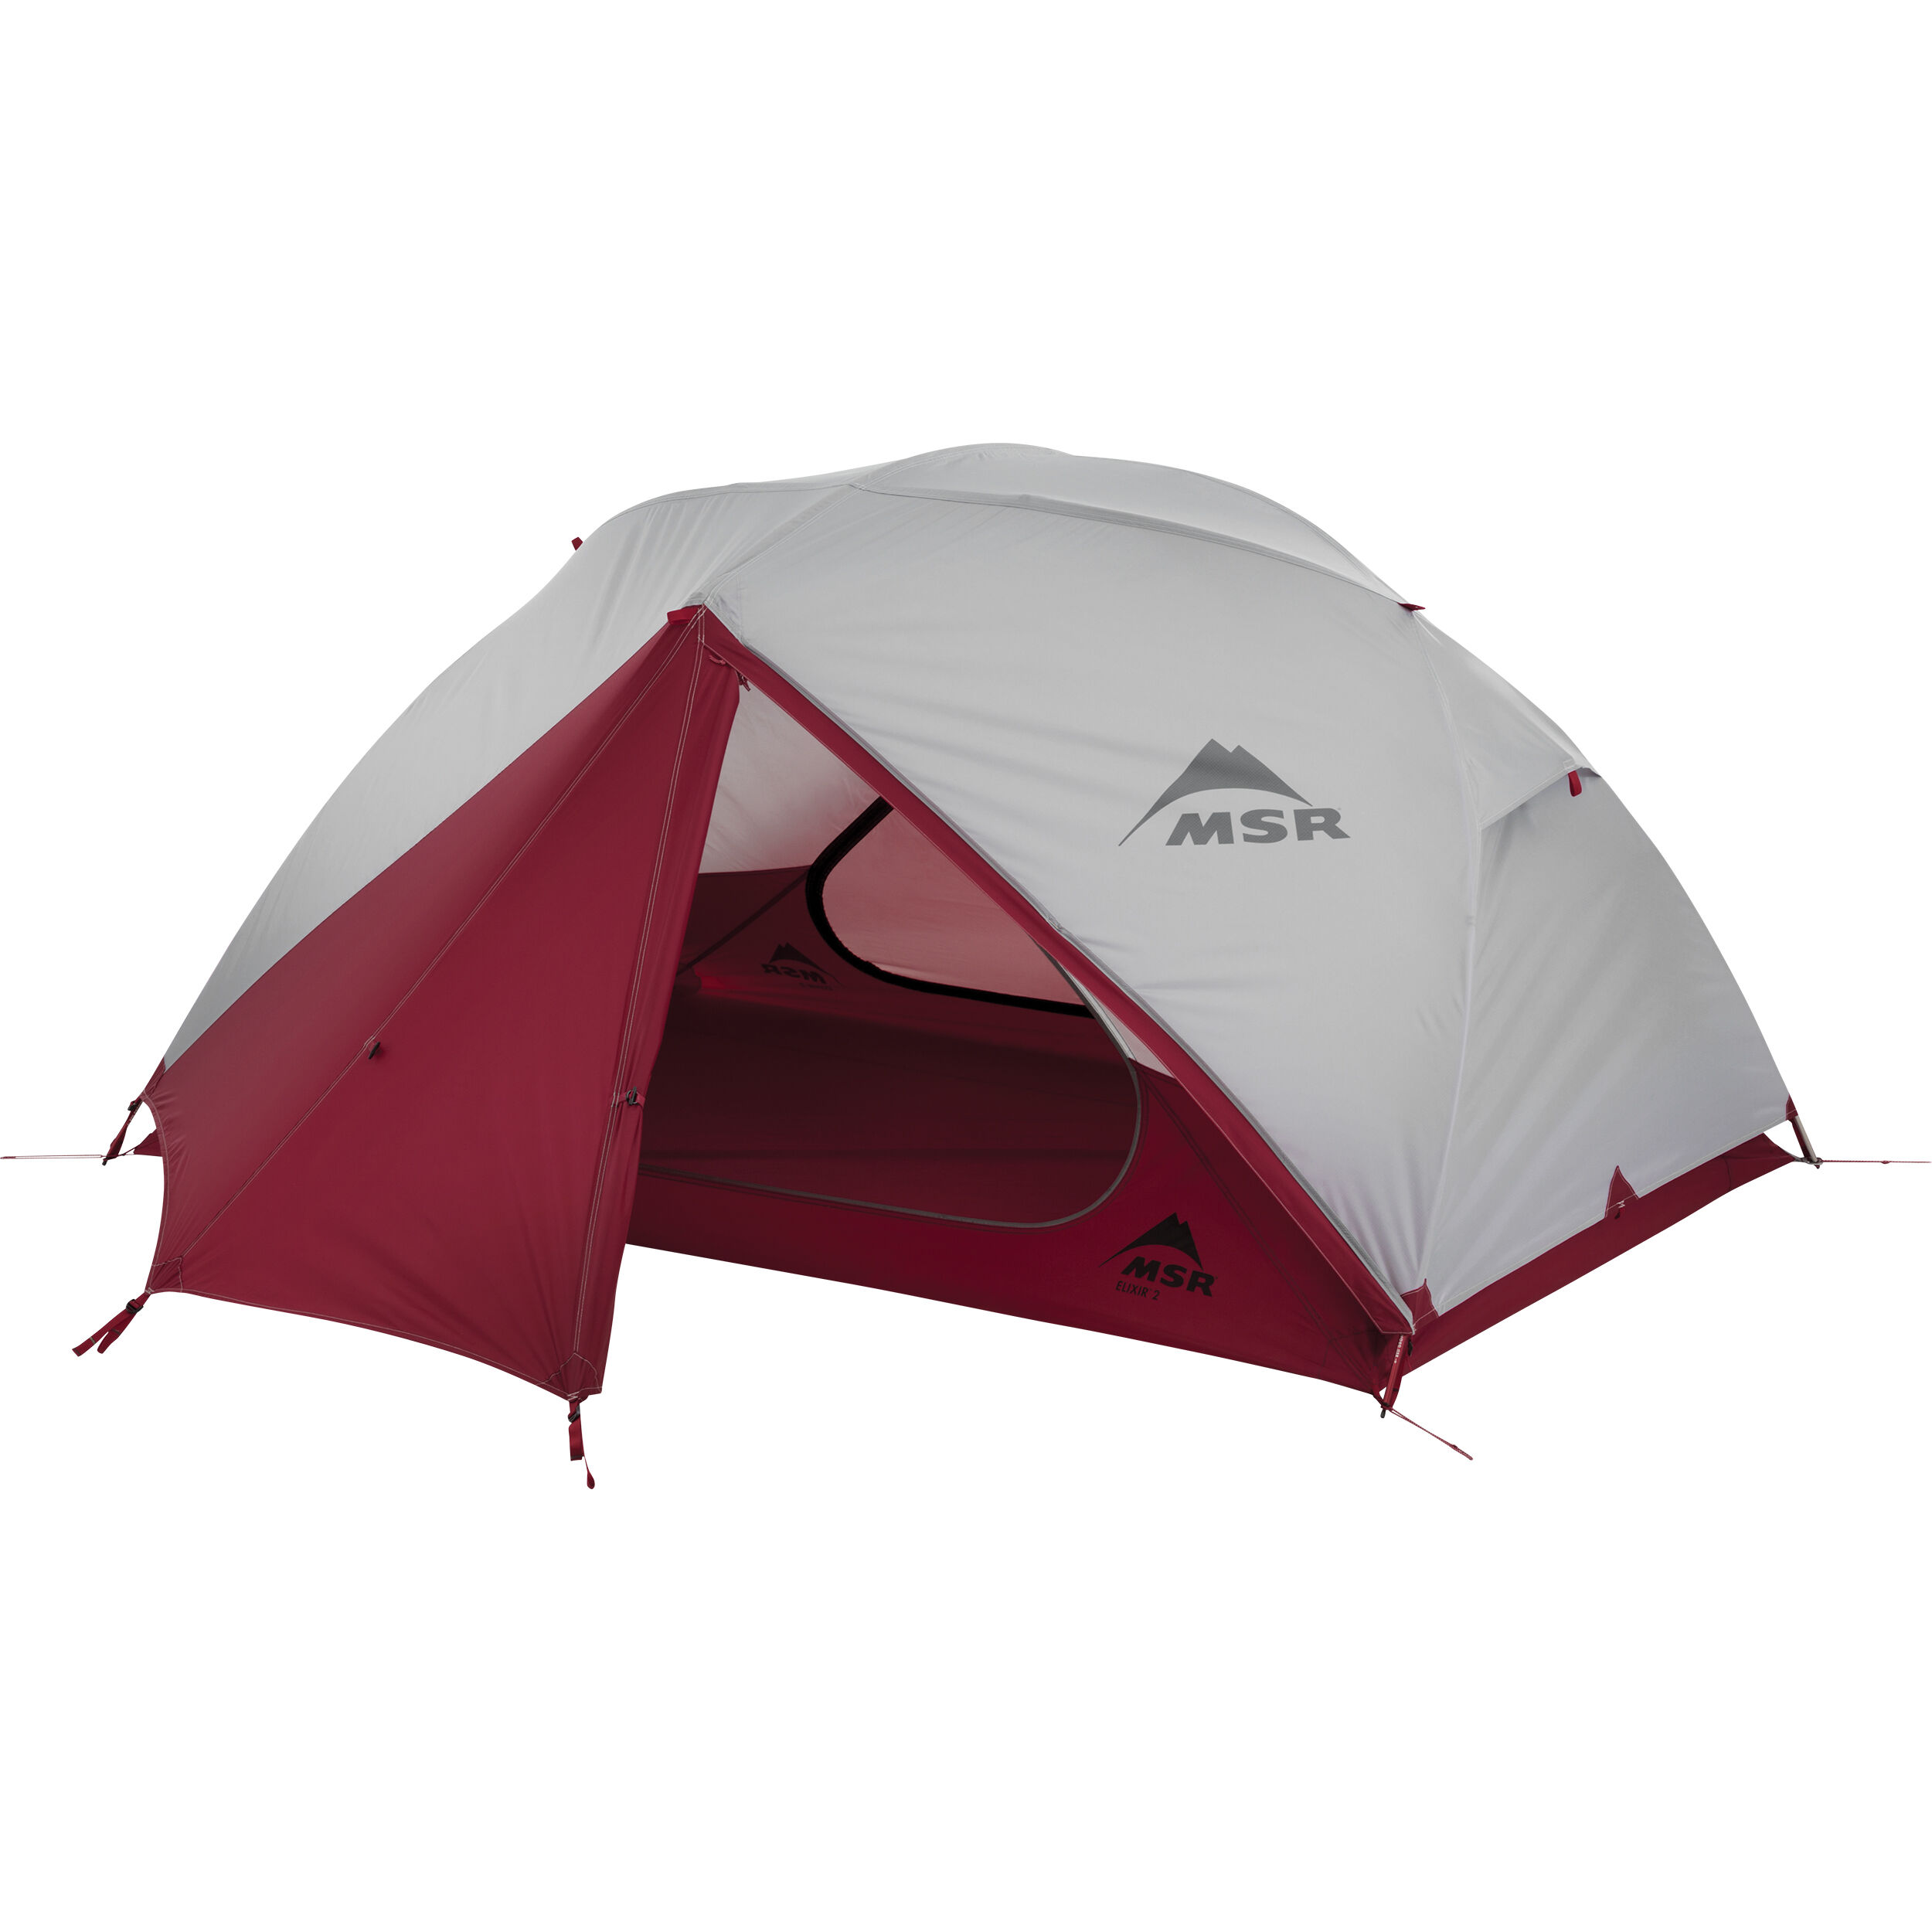 MSR® Tents | Backpacking & Camping Tents, Poles, Stakes